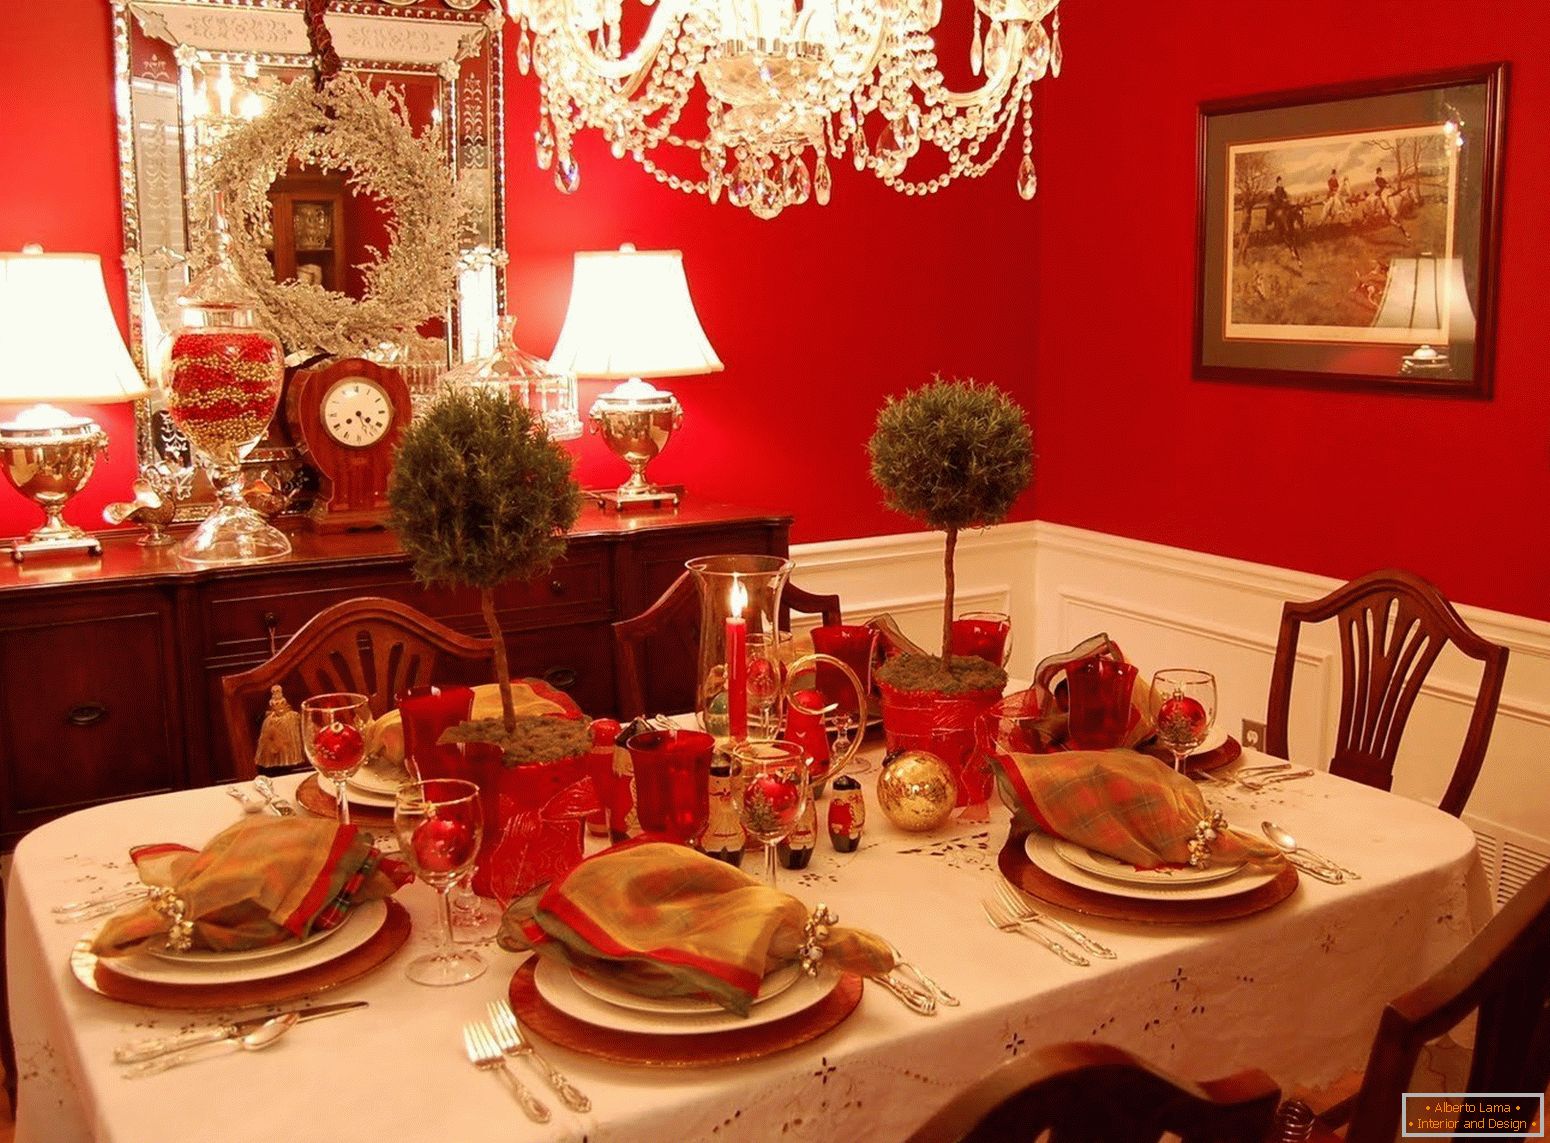 Red walls in the dining room